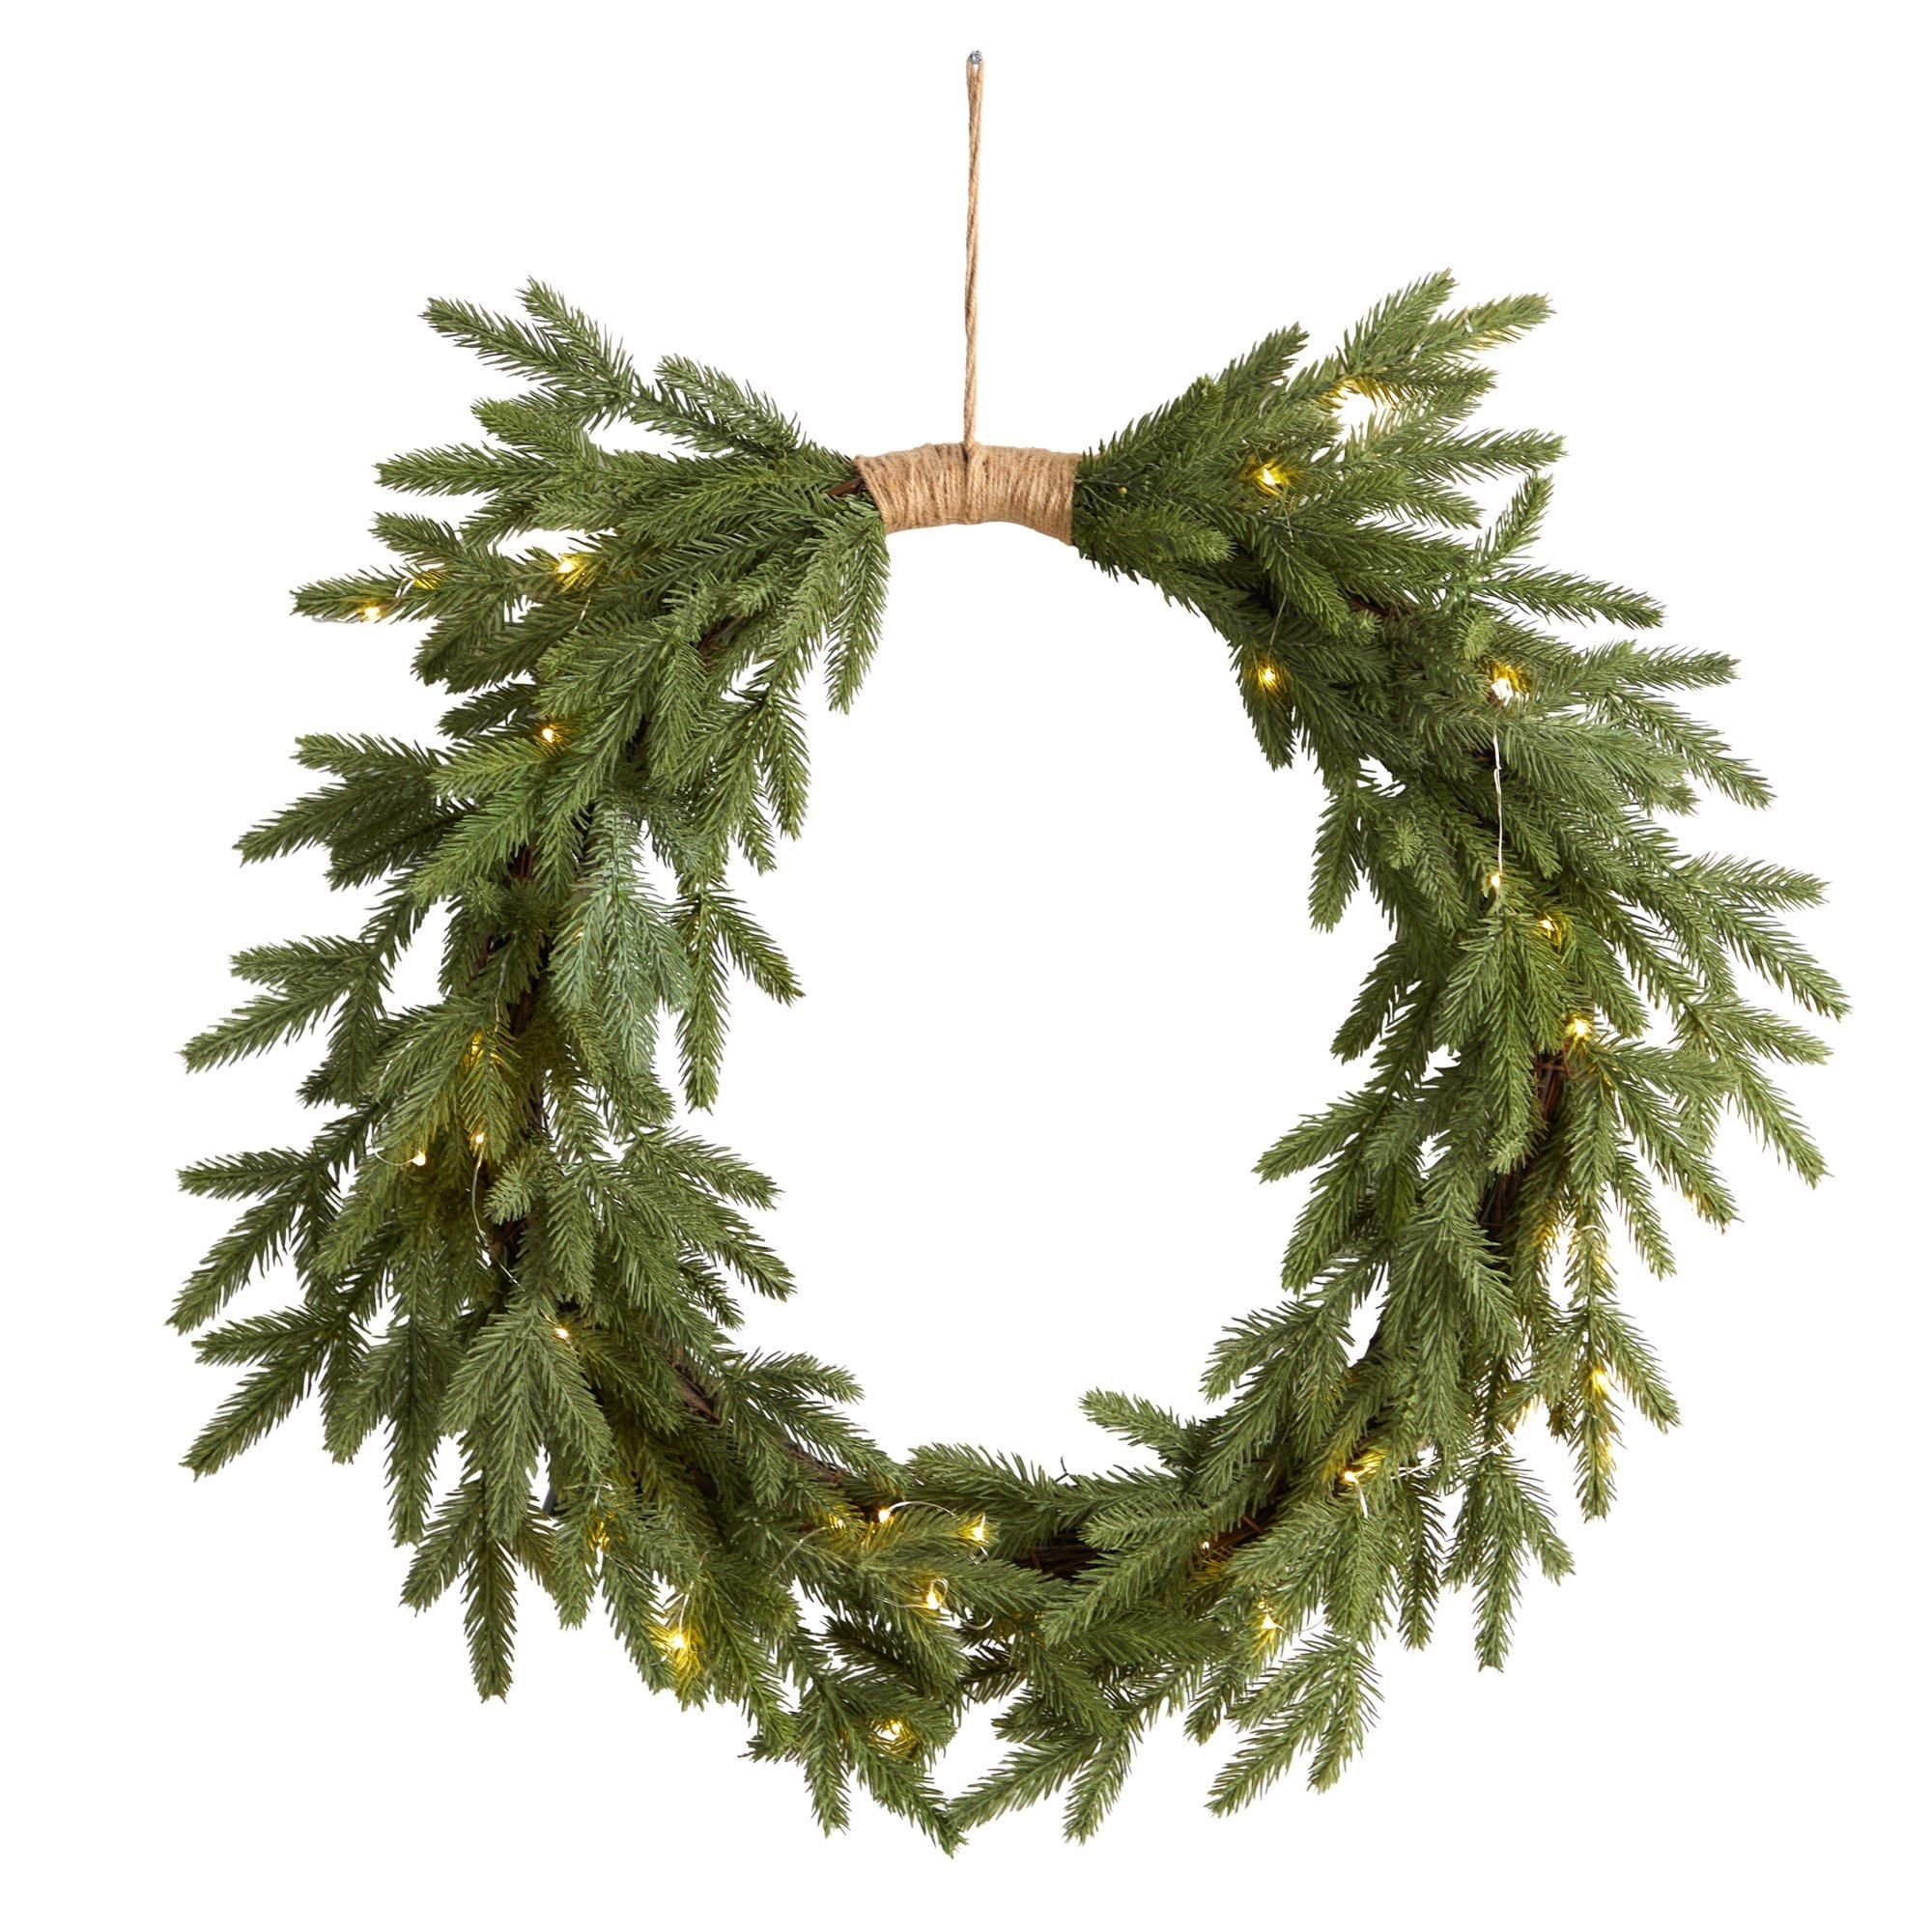 24" Holiday Christmas Pre-Lit Cascading Pine Wreath" | Nearly Natural